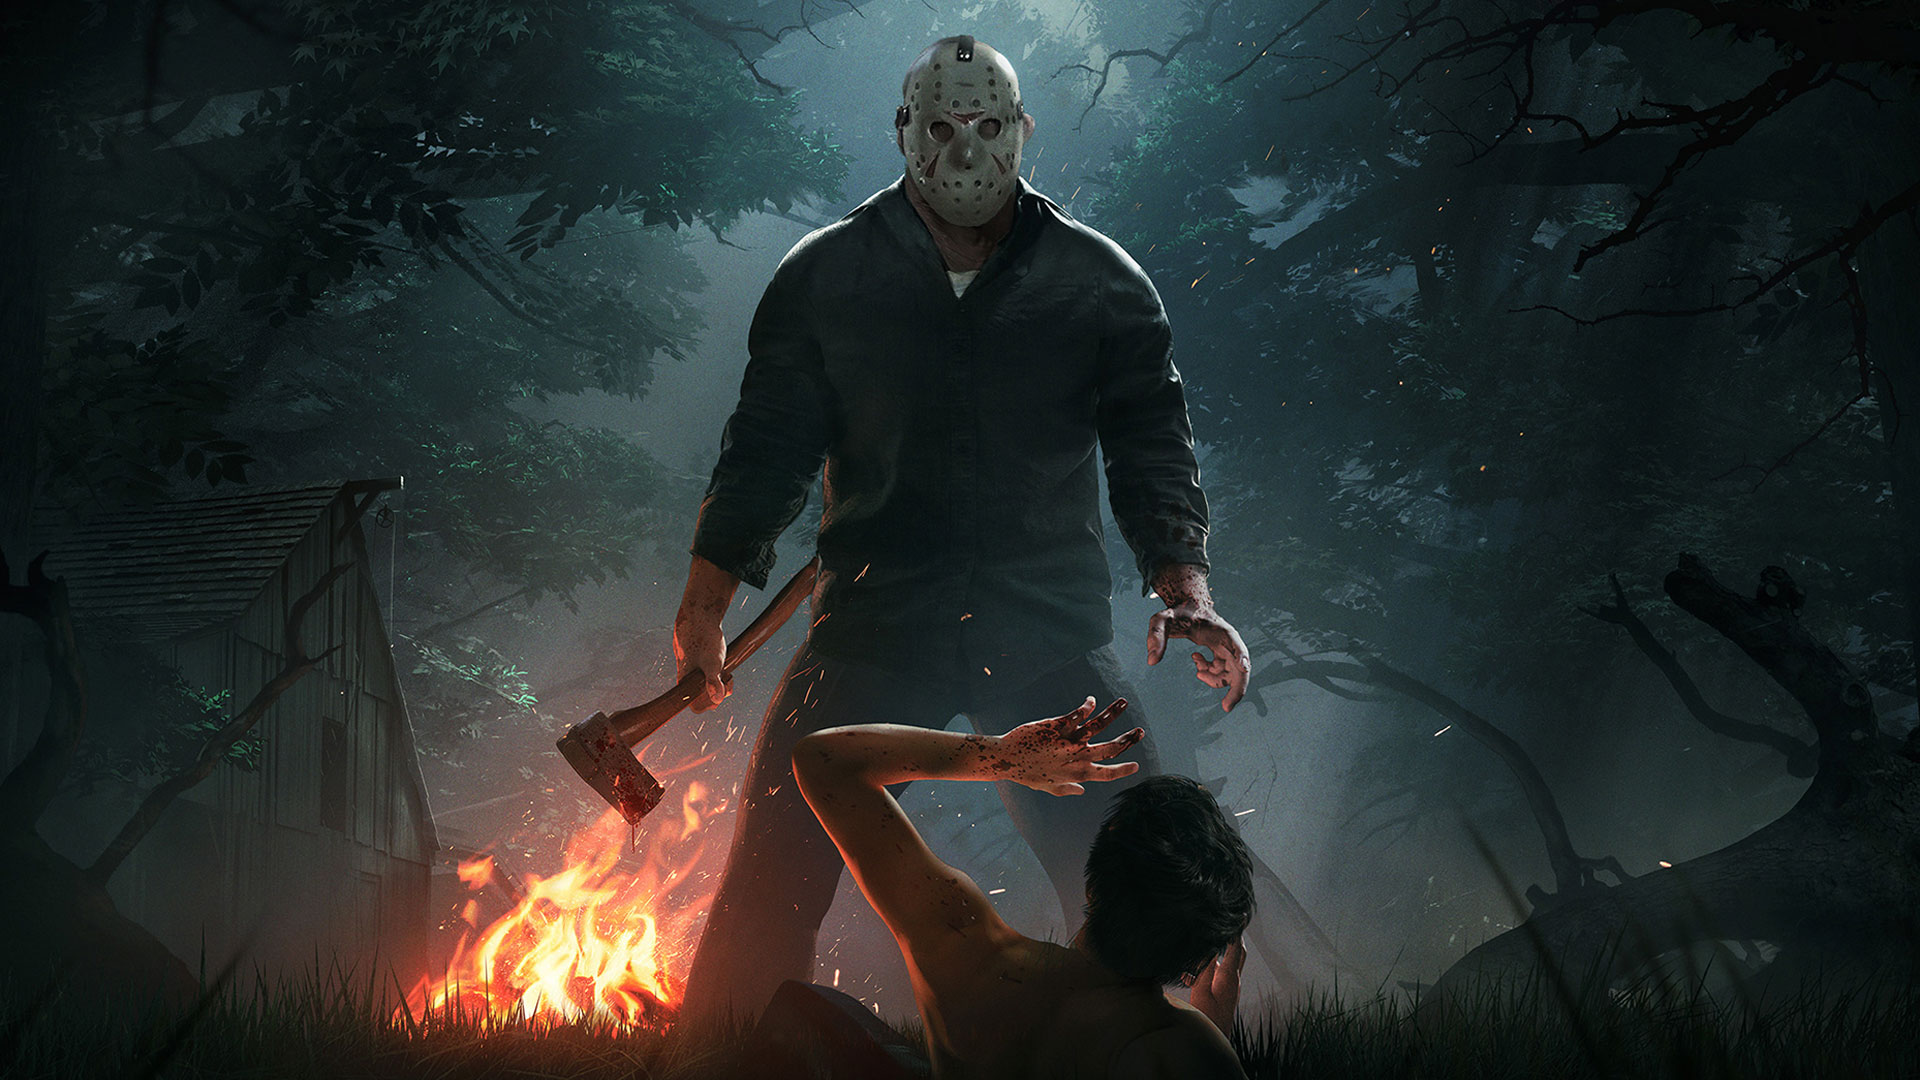 Close up of the cover art for Friday the 13th, published by Nighthawk